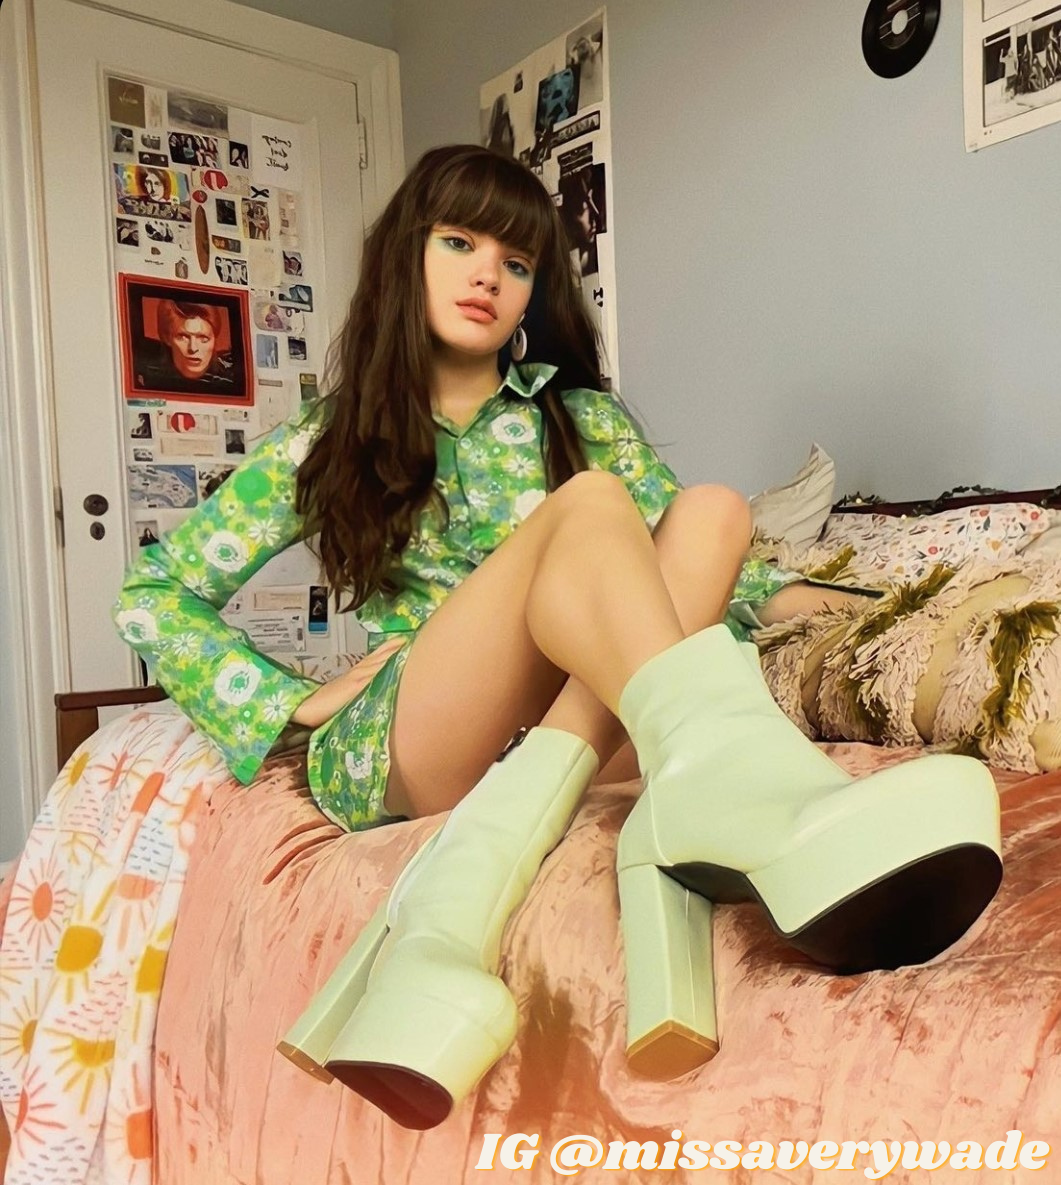 Pastel Green Patent Leather Ankle Gogo Boots PRE-ORDER